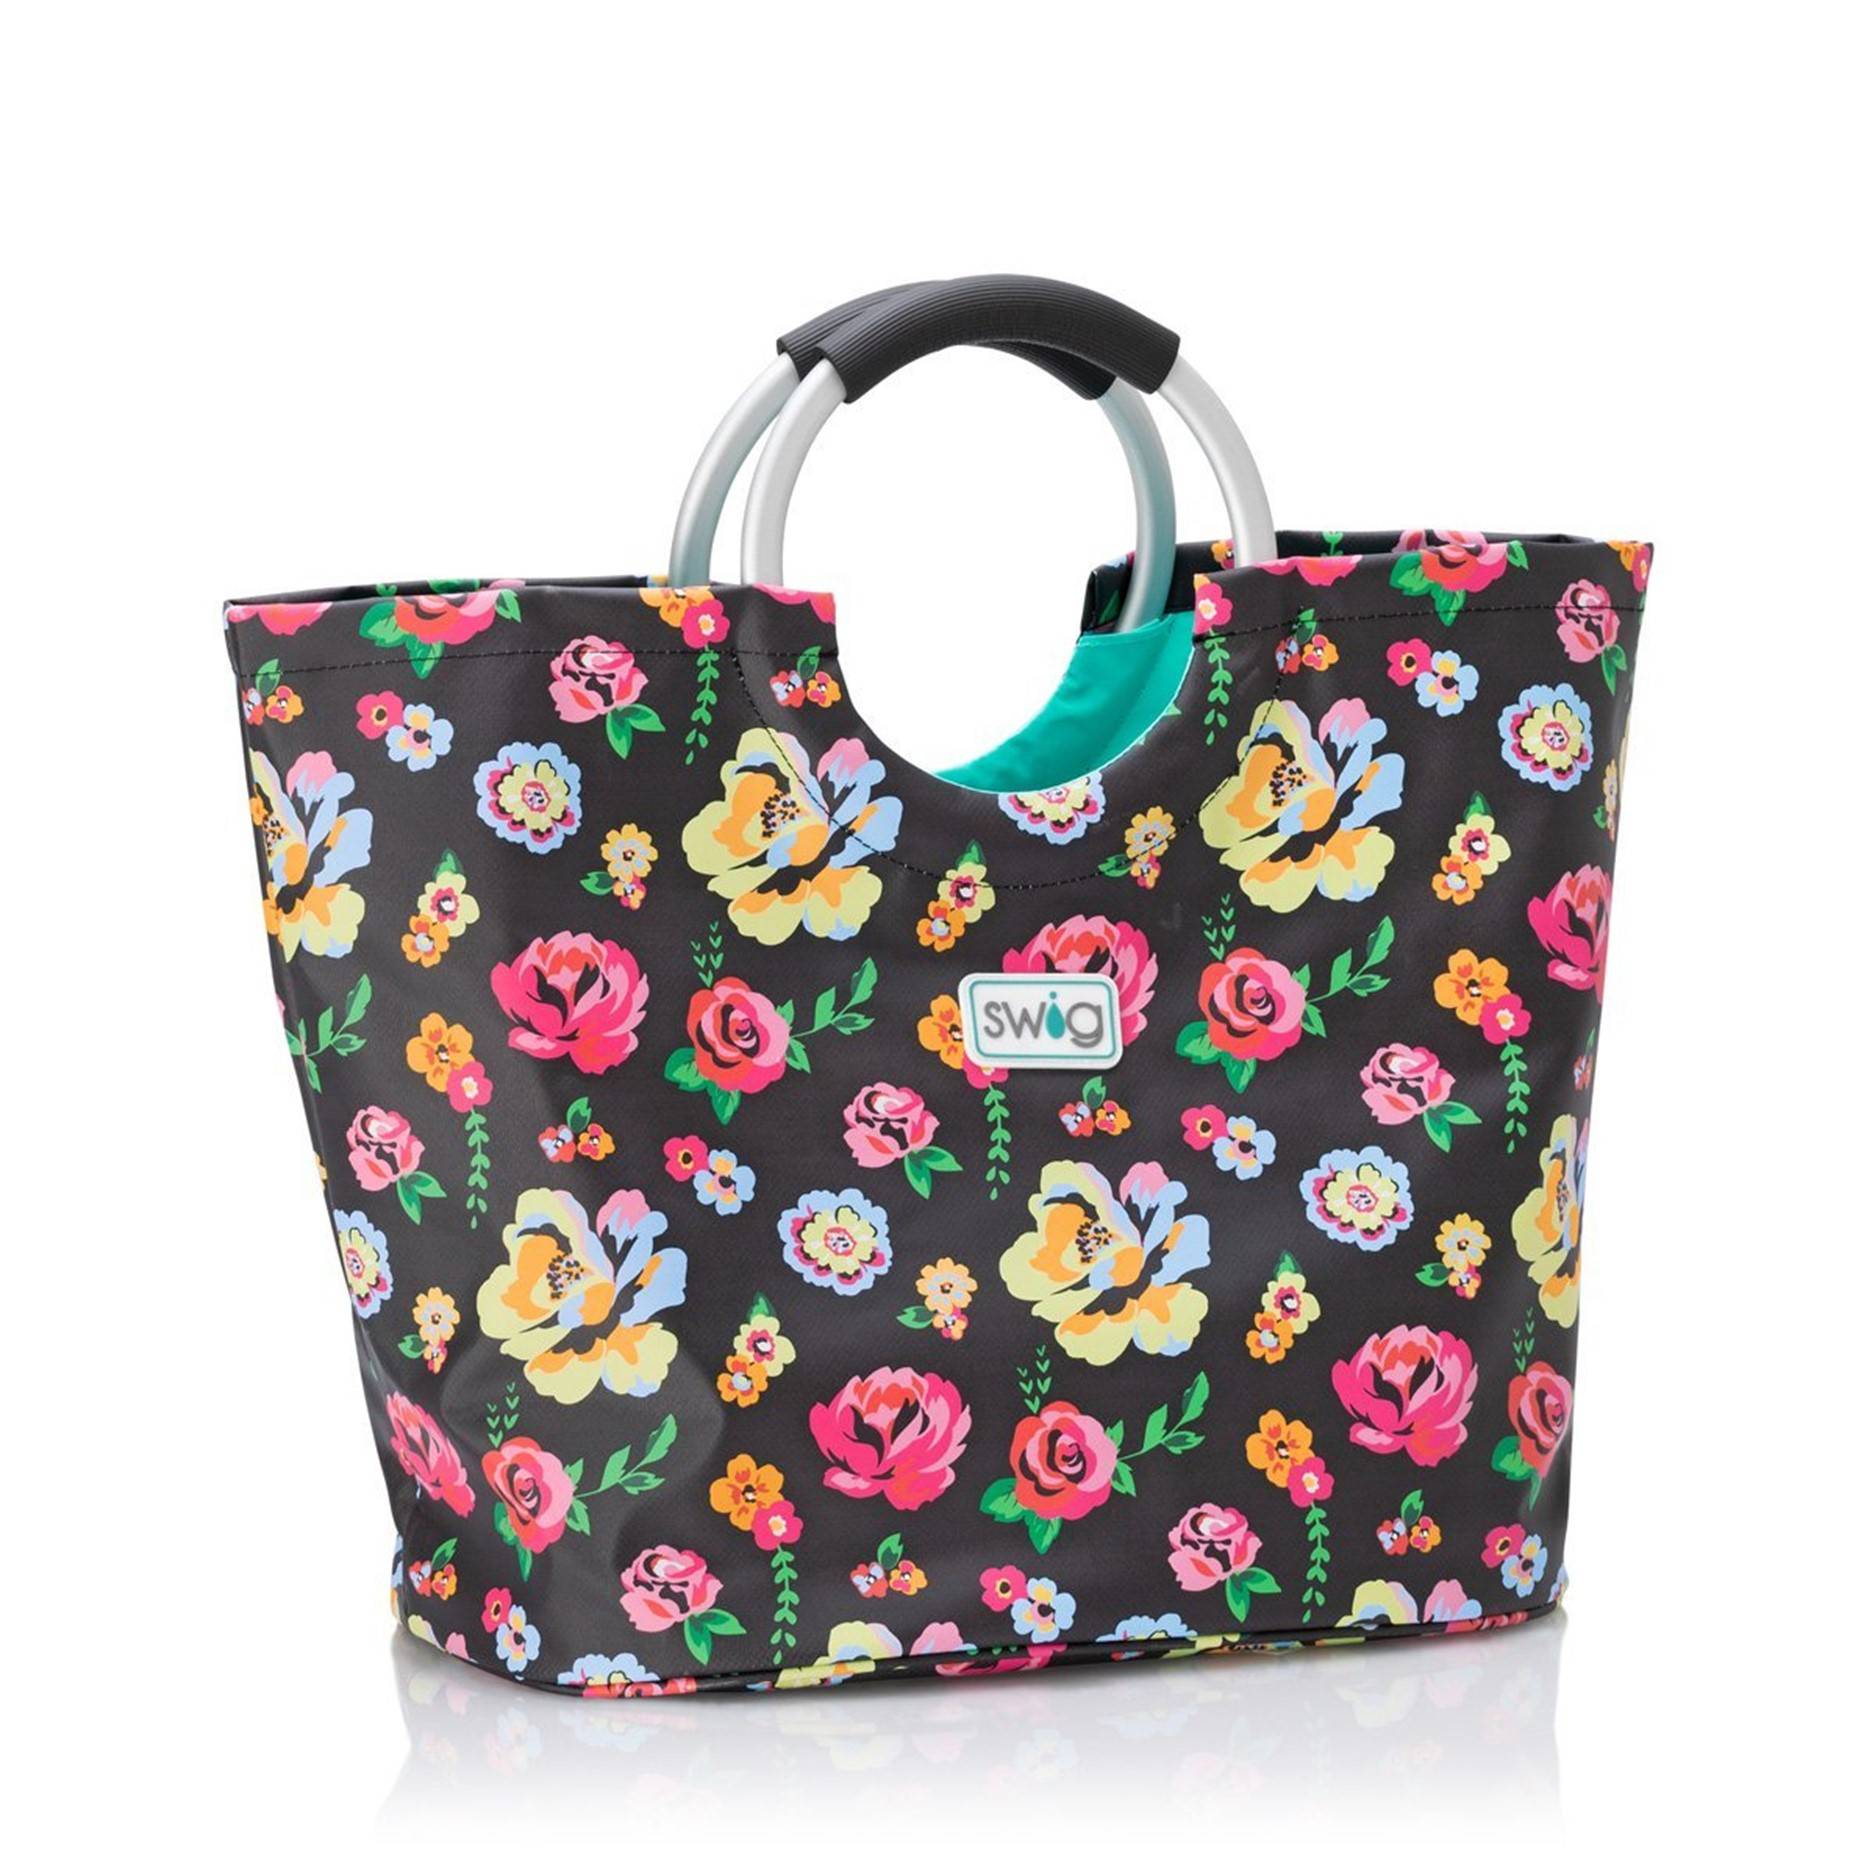 Swig tote bag with a flower design